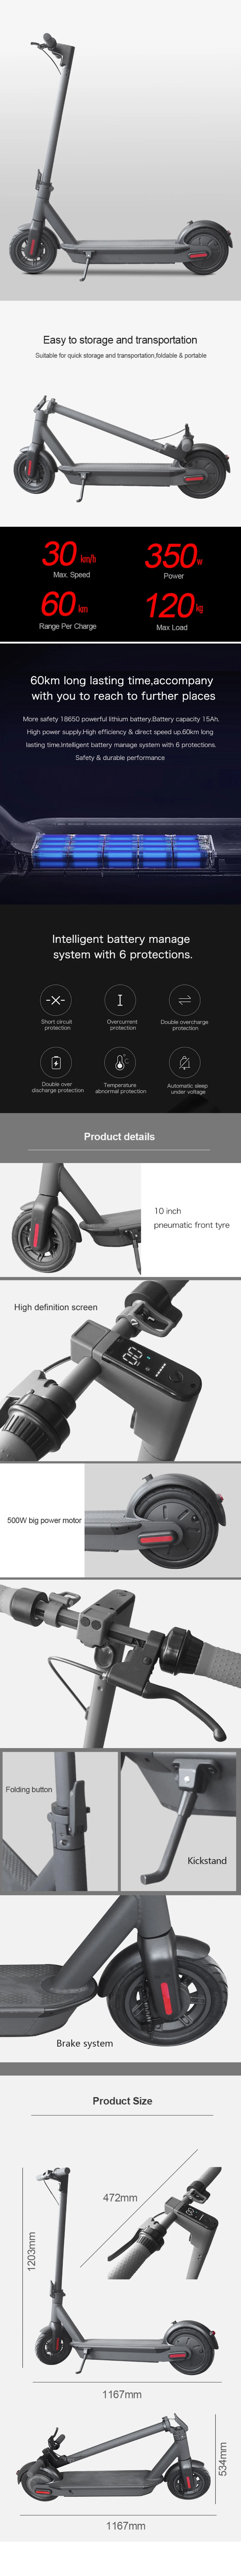 10 Inch Electric Scooter